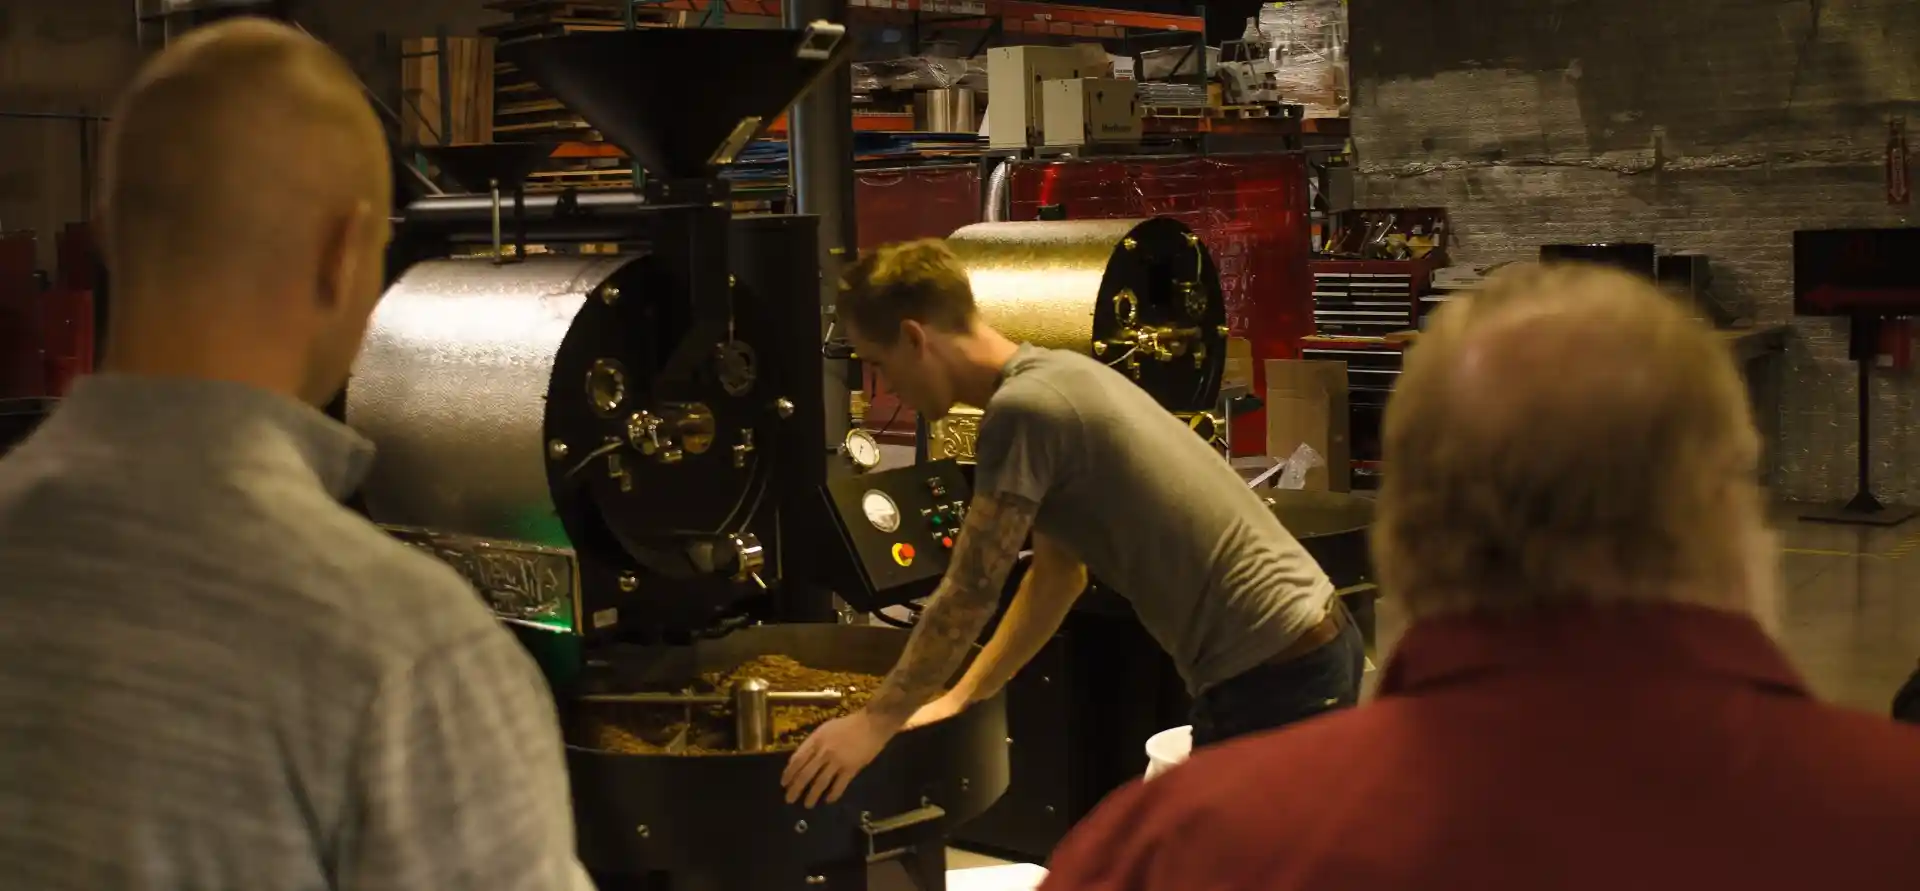 A San Franciscan Roaster™ roasting some good coffee